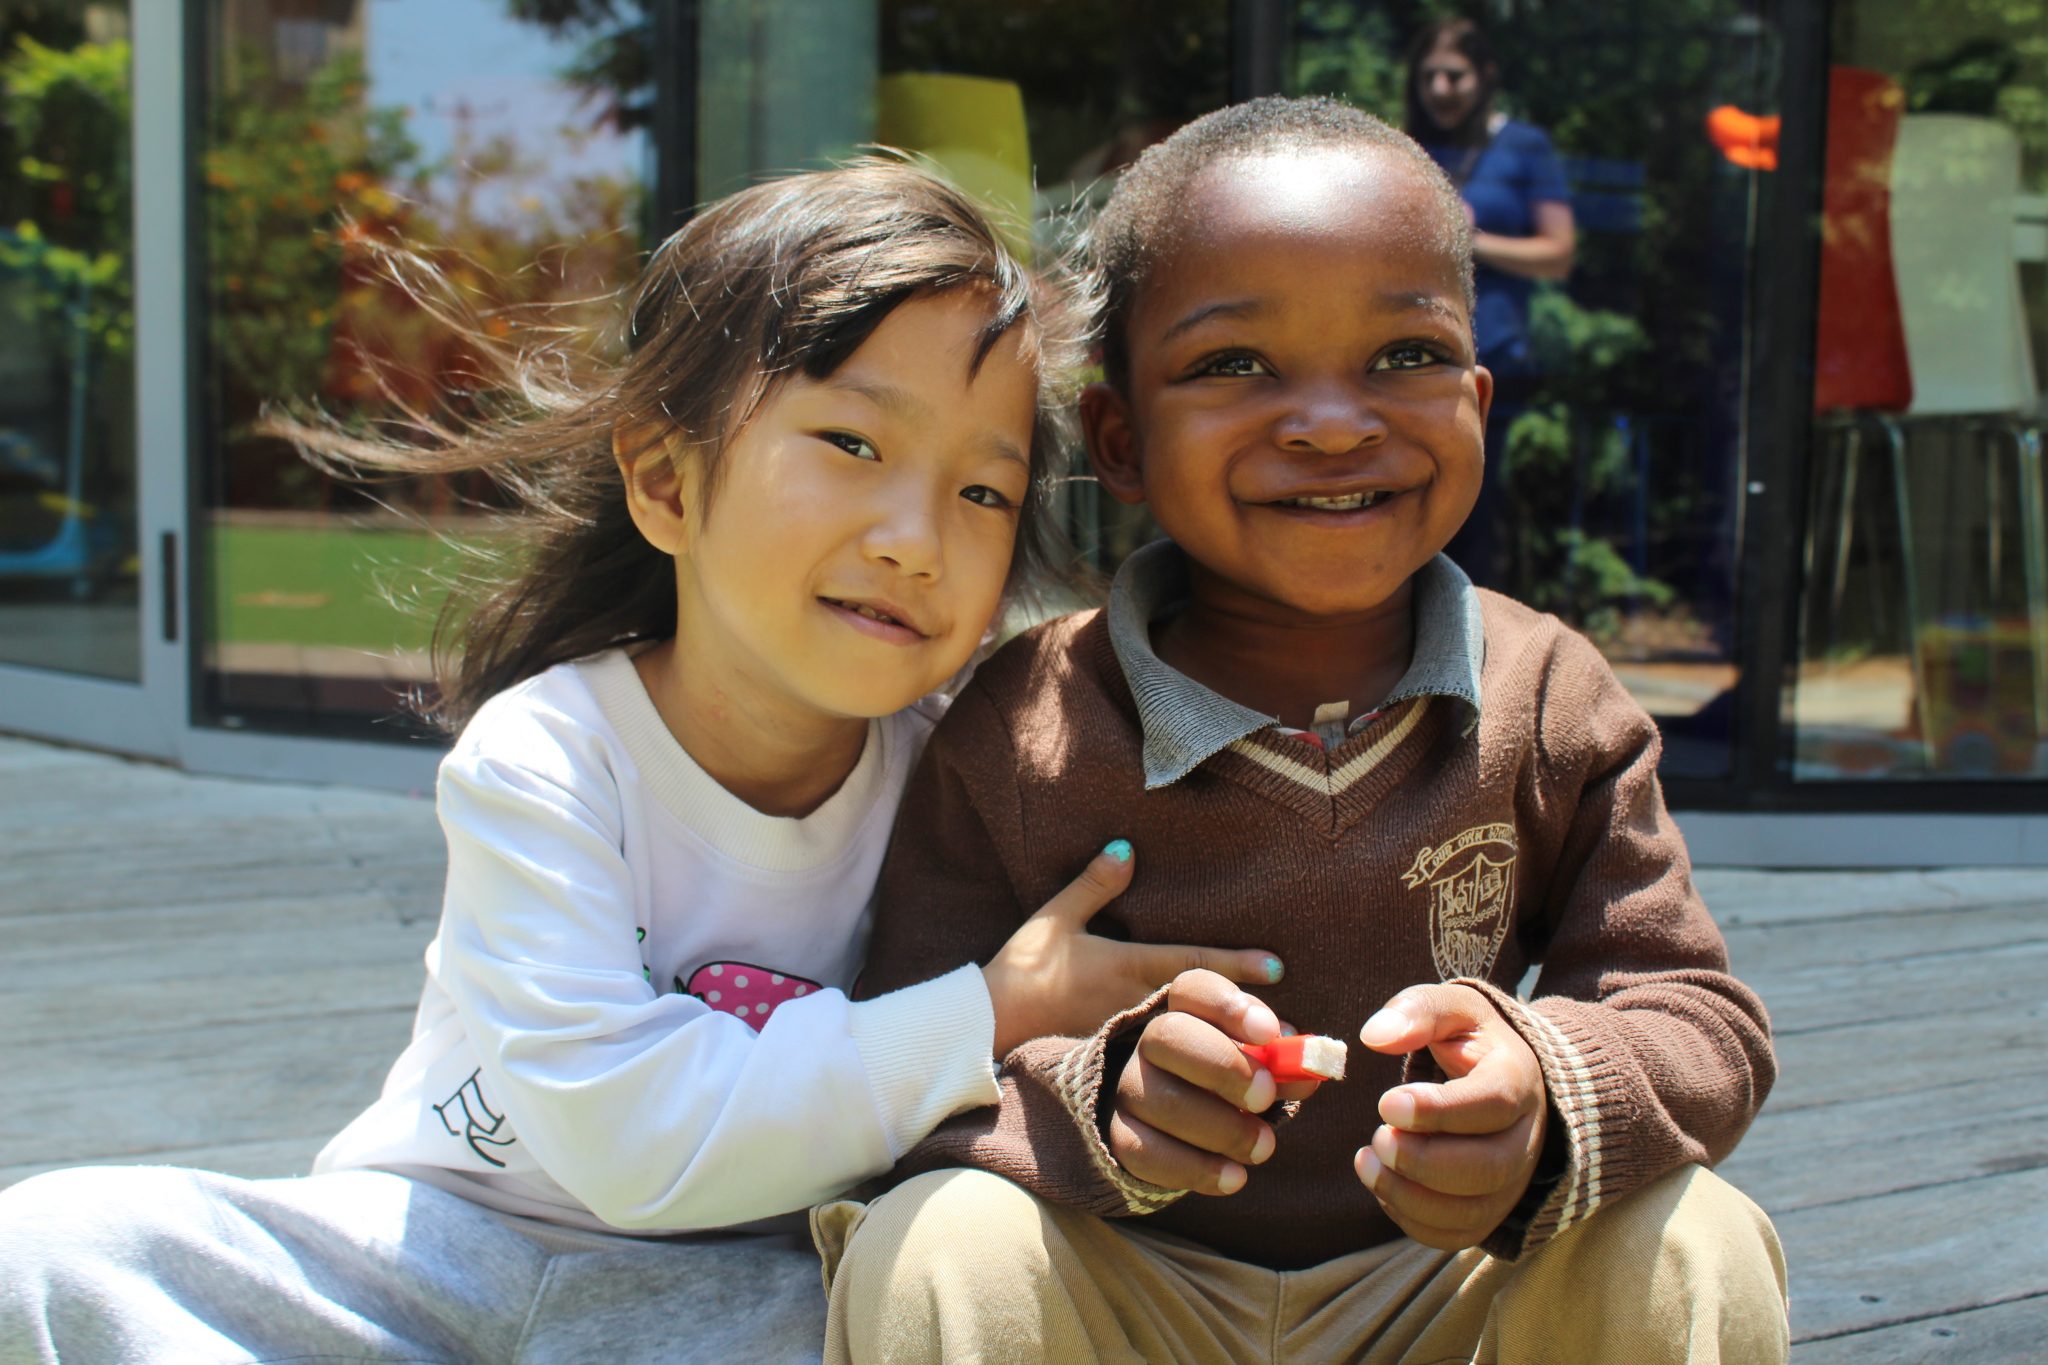 Hannah, from Myanmar, and Abdul from Zanzibar are just two of the children who have received life-saving surgery from Save A Child’s Heart. Photo courtesy Save a Child’s Heart